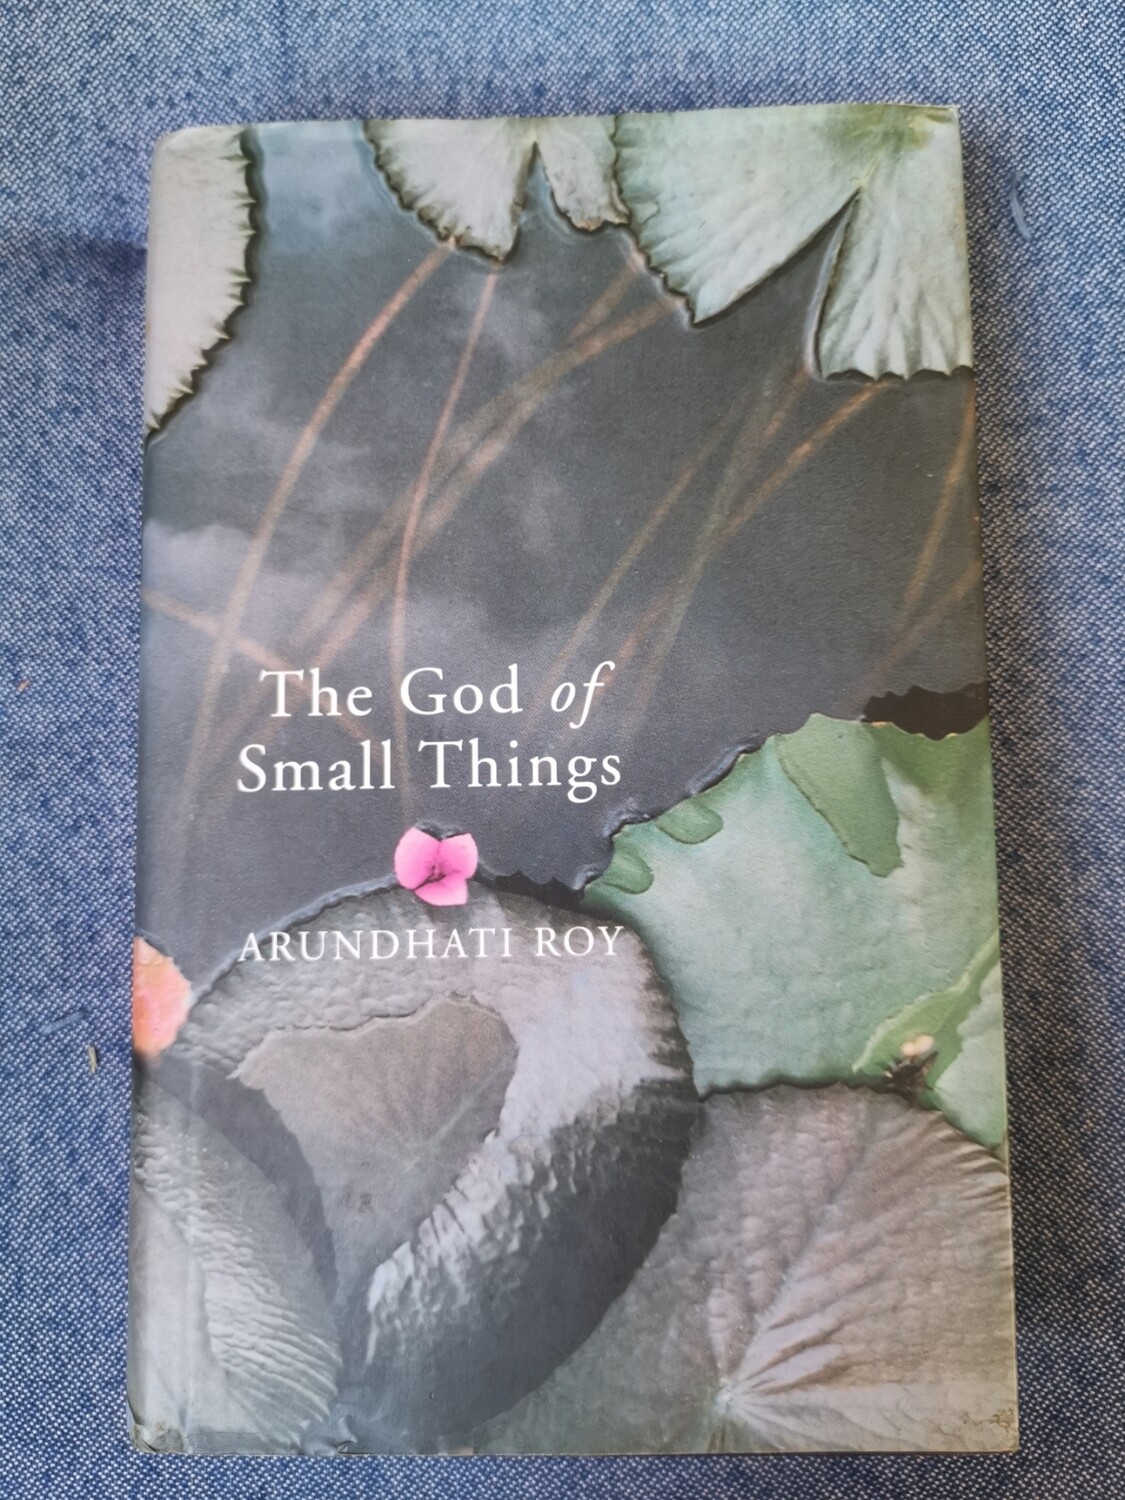 The God of small things, Arundati Roy